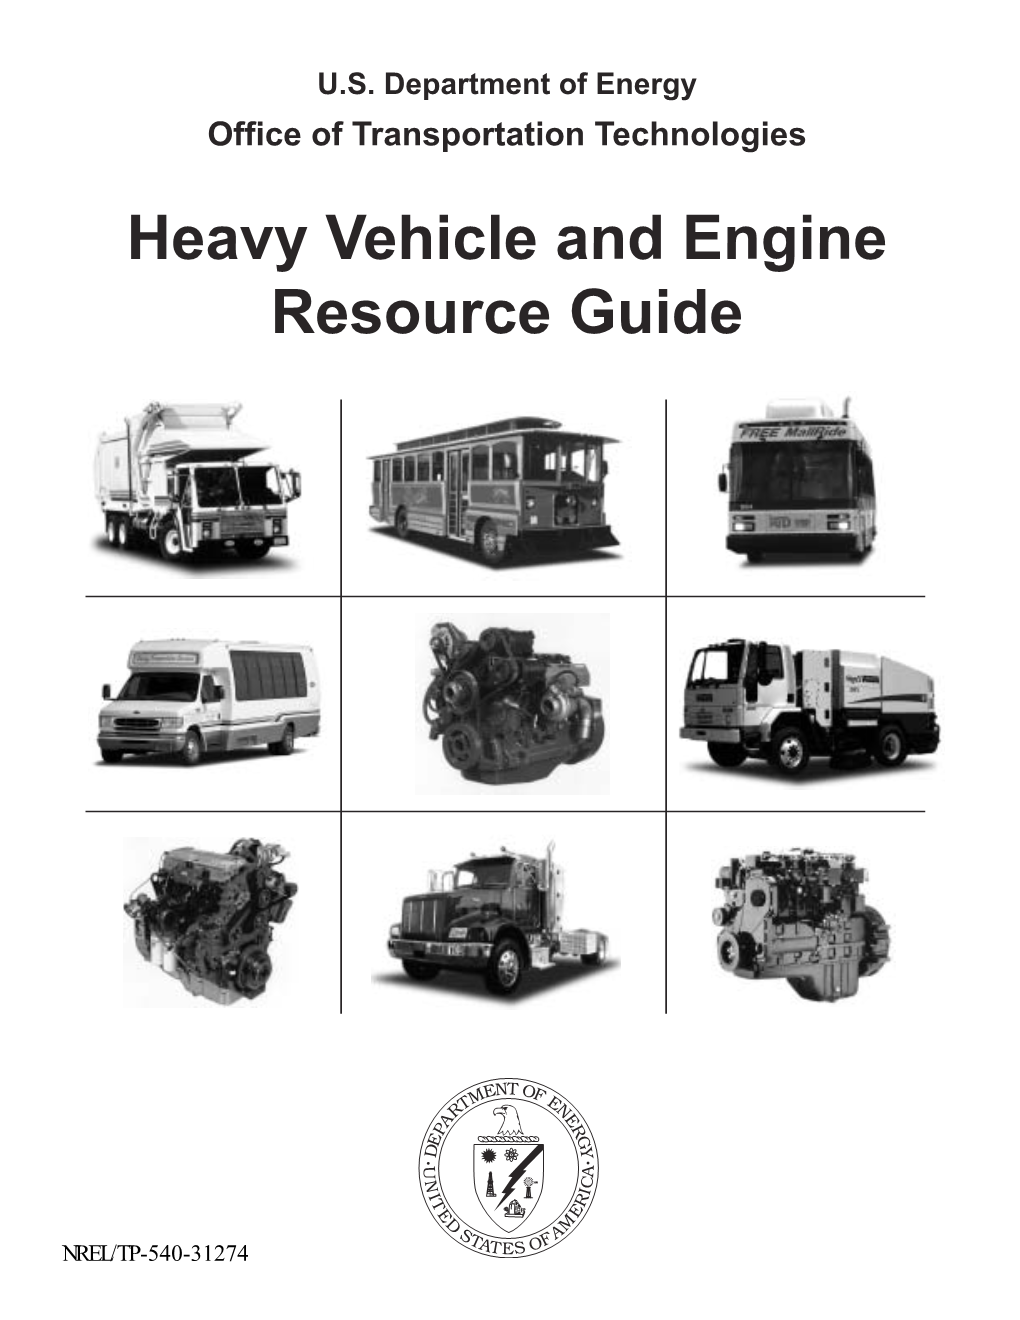 Heavy Vehicle and Engine Resource Guide